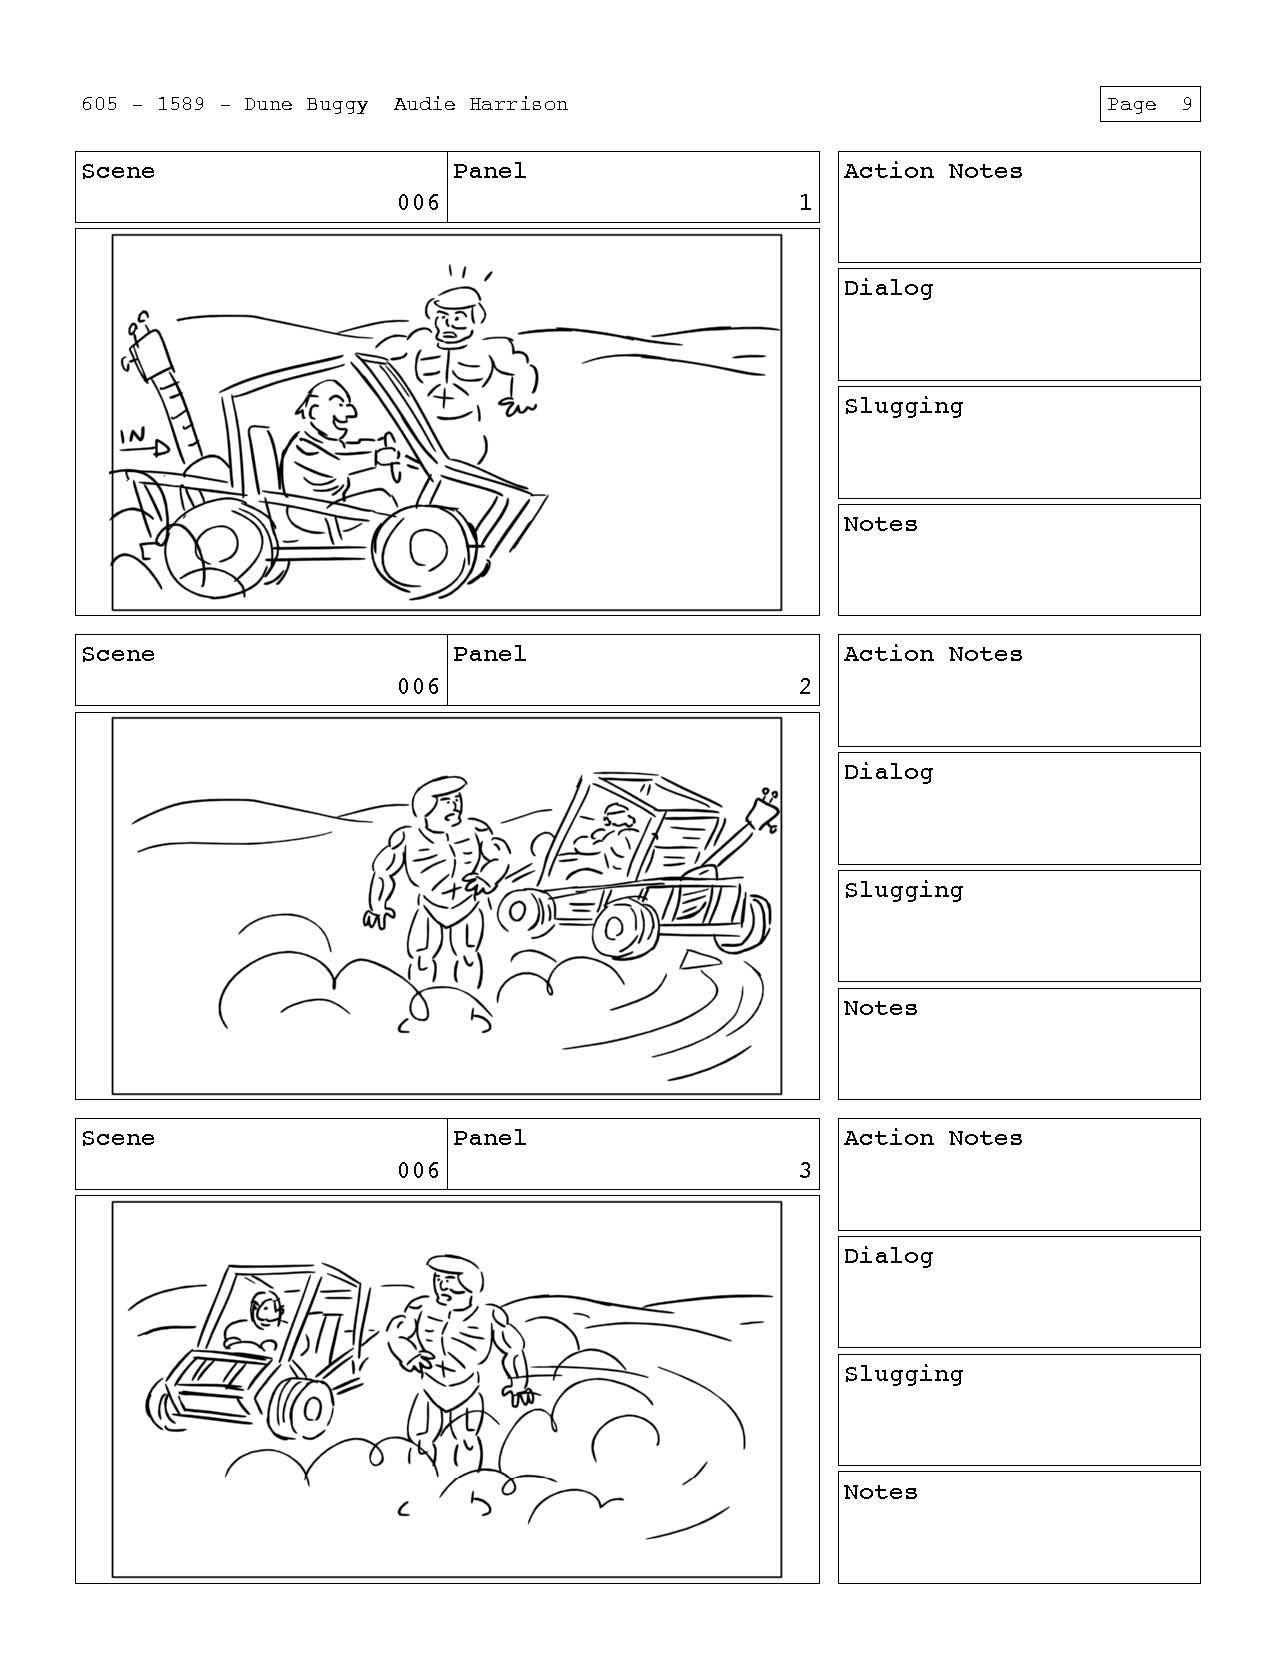 Dune_Buggy_Page_10.jpg